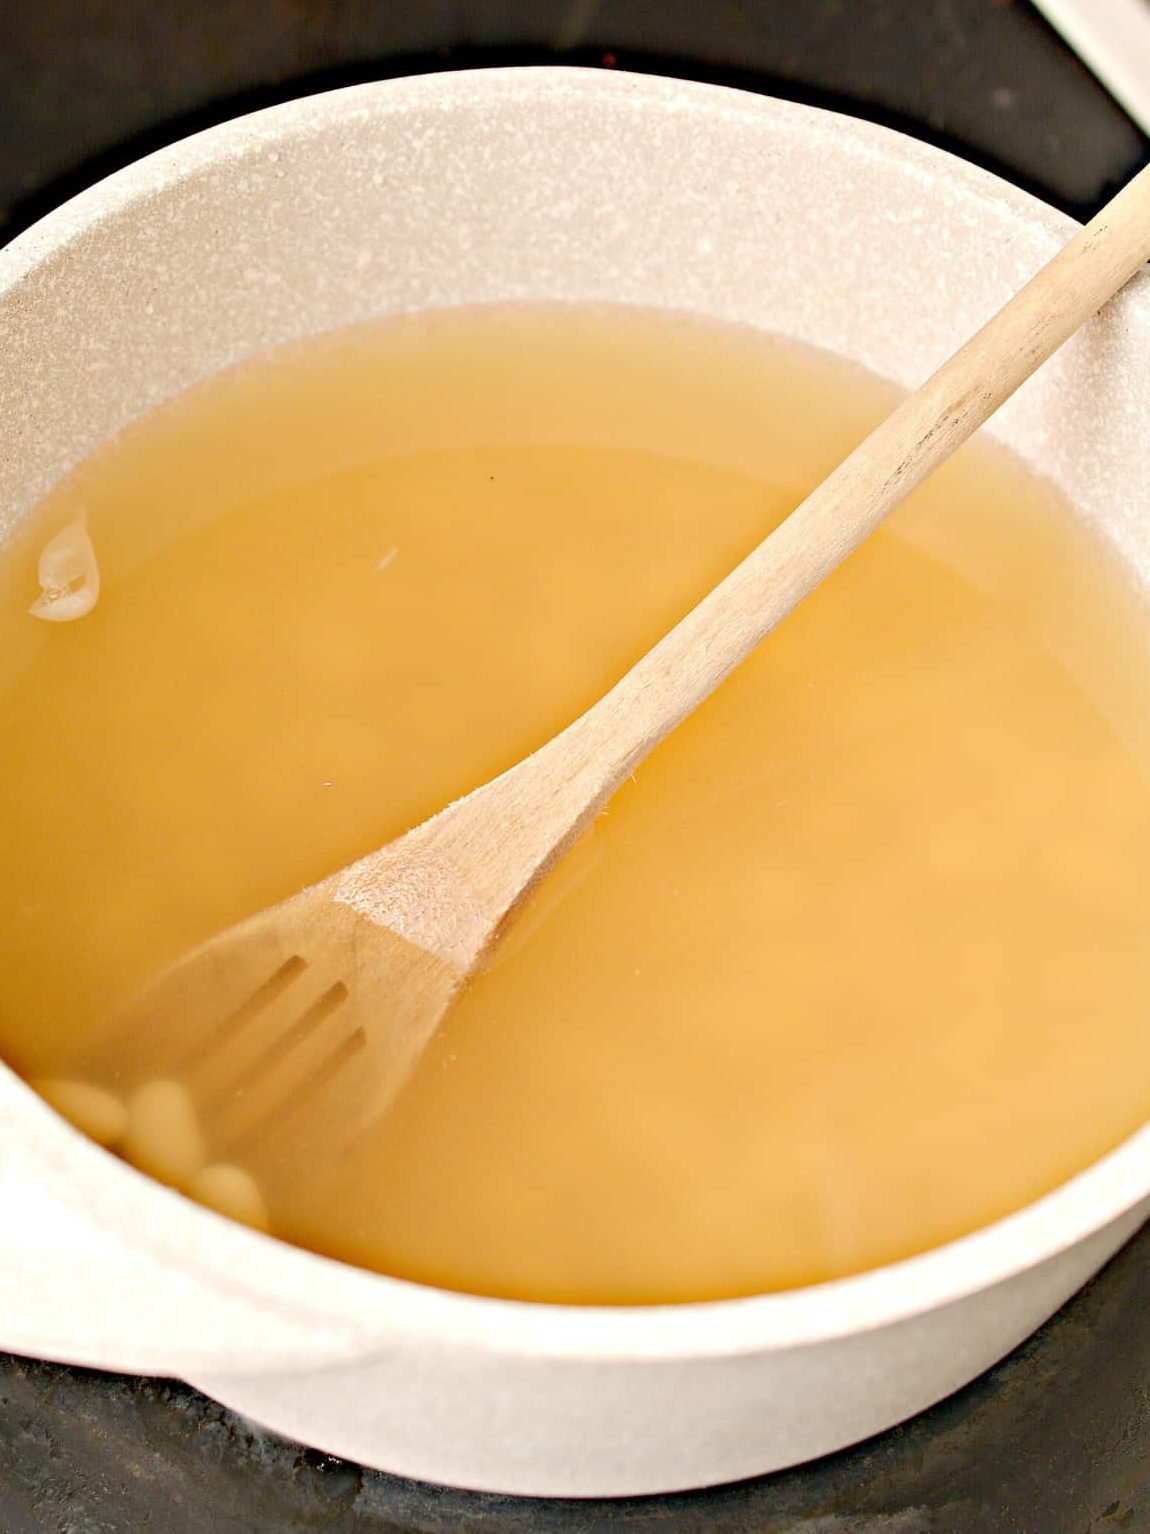 In a pot over medium-high heat on the stove, bring the chicken broth and can of beans to a boil.